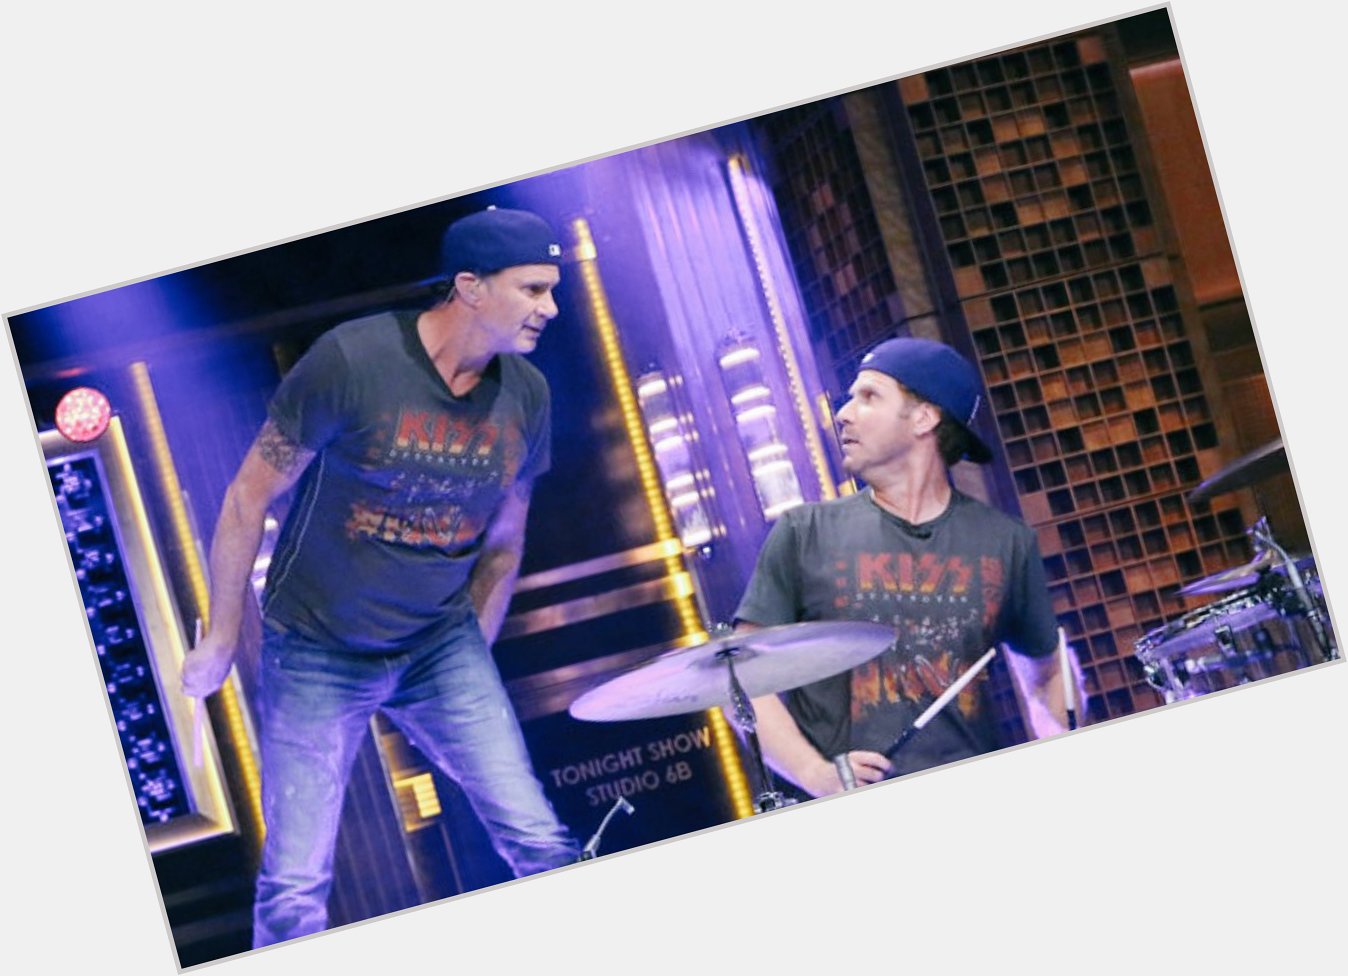 Happy birthday Chad Smith. Who remembers that famous drum off with Will Ferrell?  